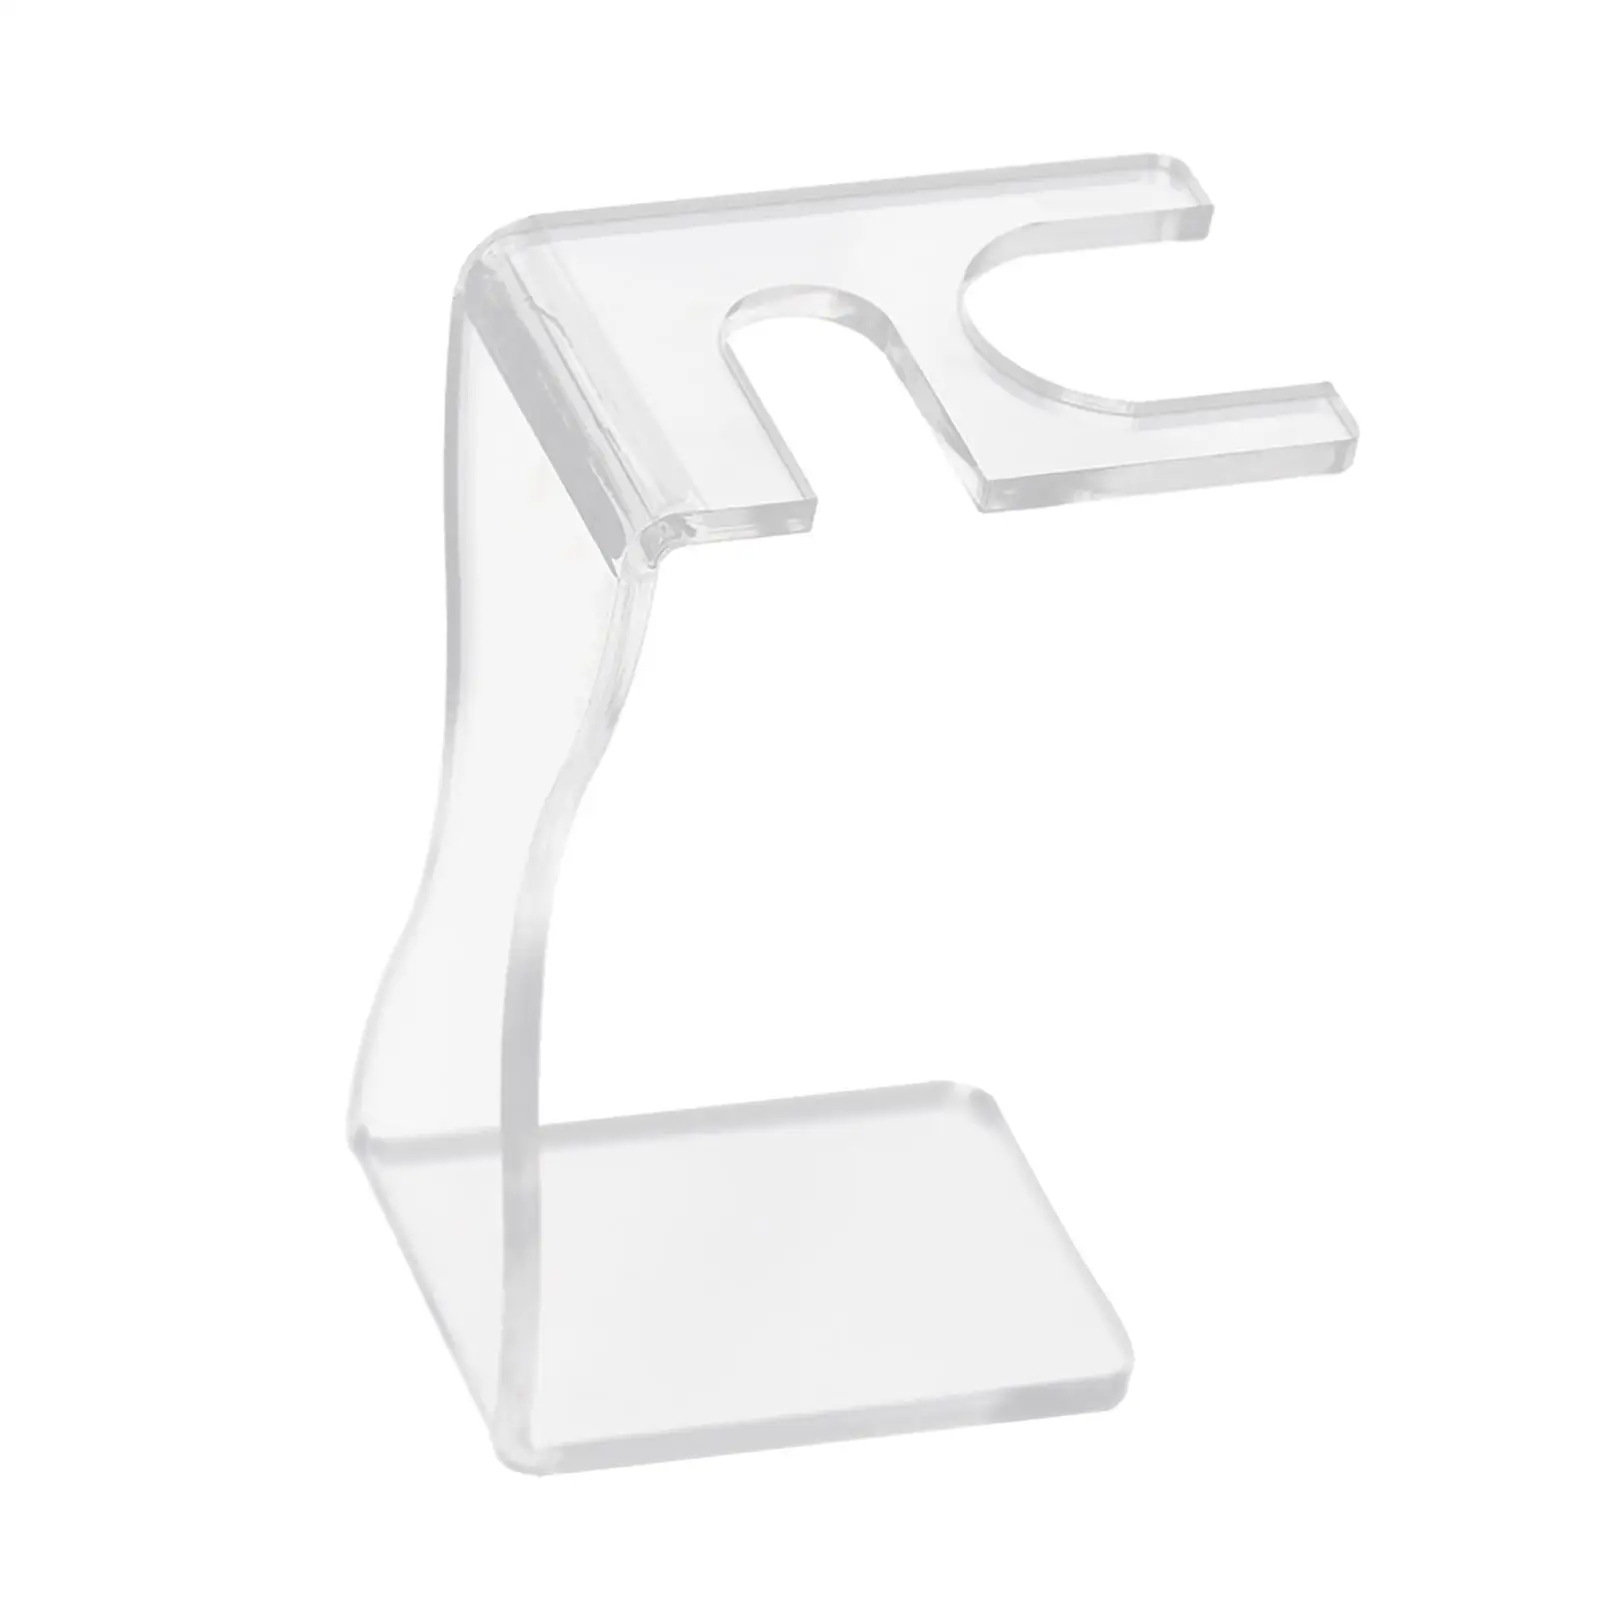 Manual Shaver Stand Holder Rack Multipurpose Anti Slip Base Durable Accessories 4.4inch Tall for Protecting and Drying Shaver